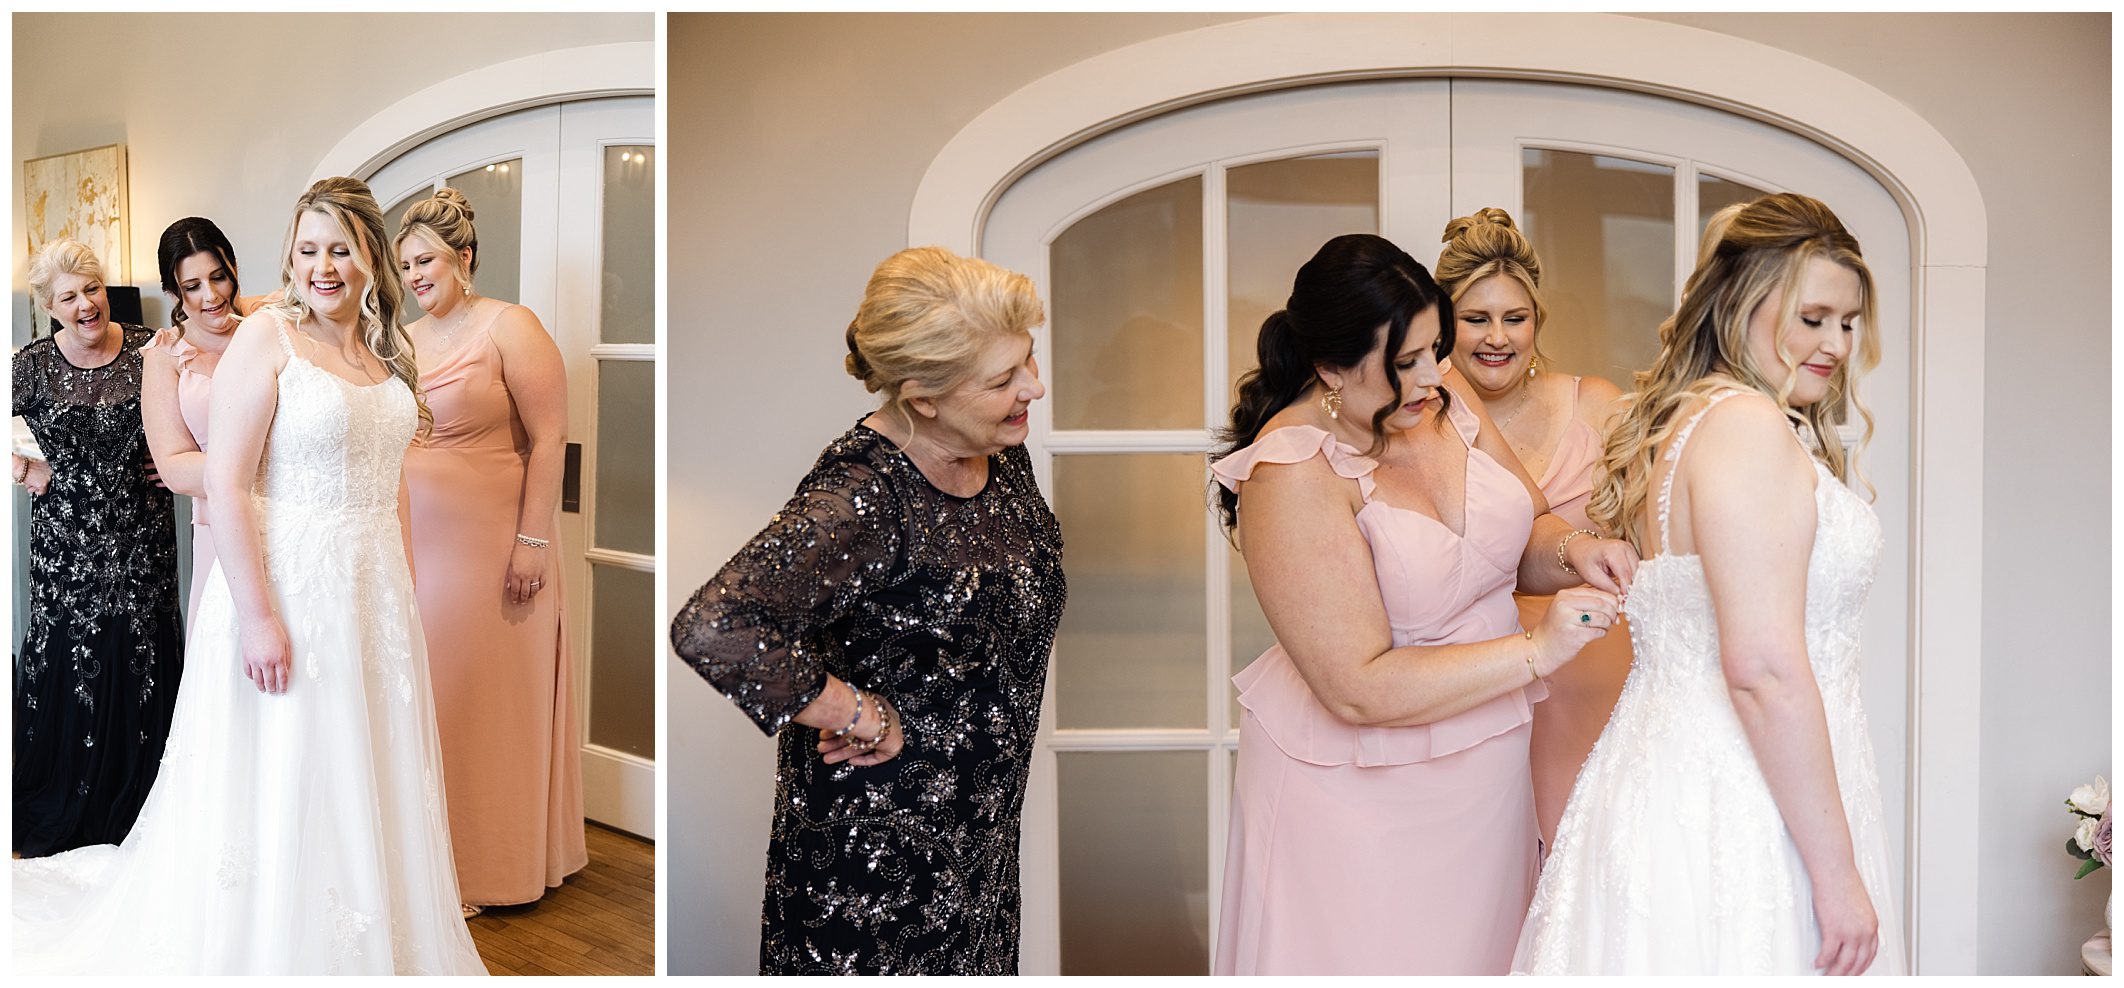 Bride and bridesmaids in pastel dresses smiling and adjusting dress details in a room with elegant decor, overlooking the rain at Chestnut Ridge.